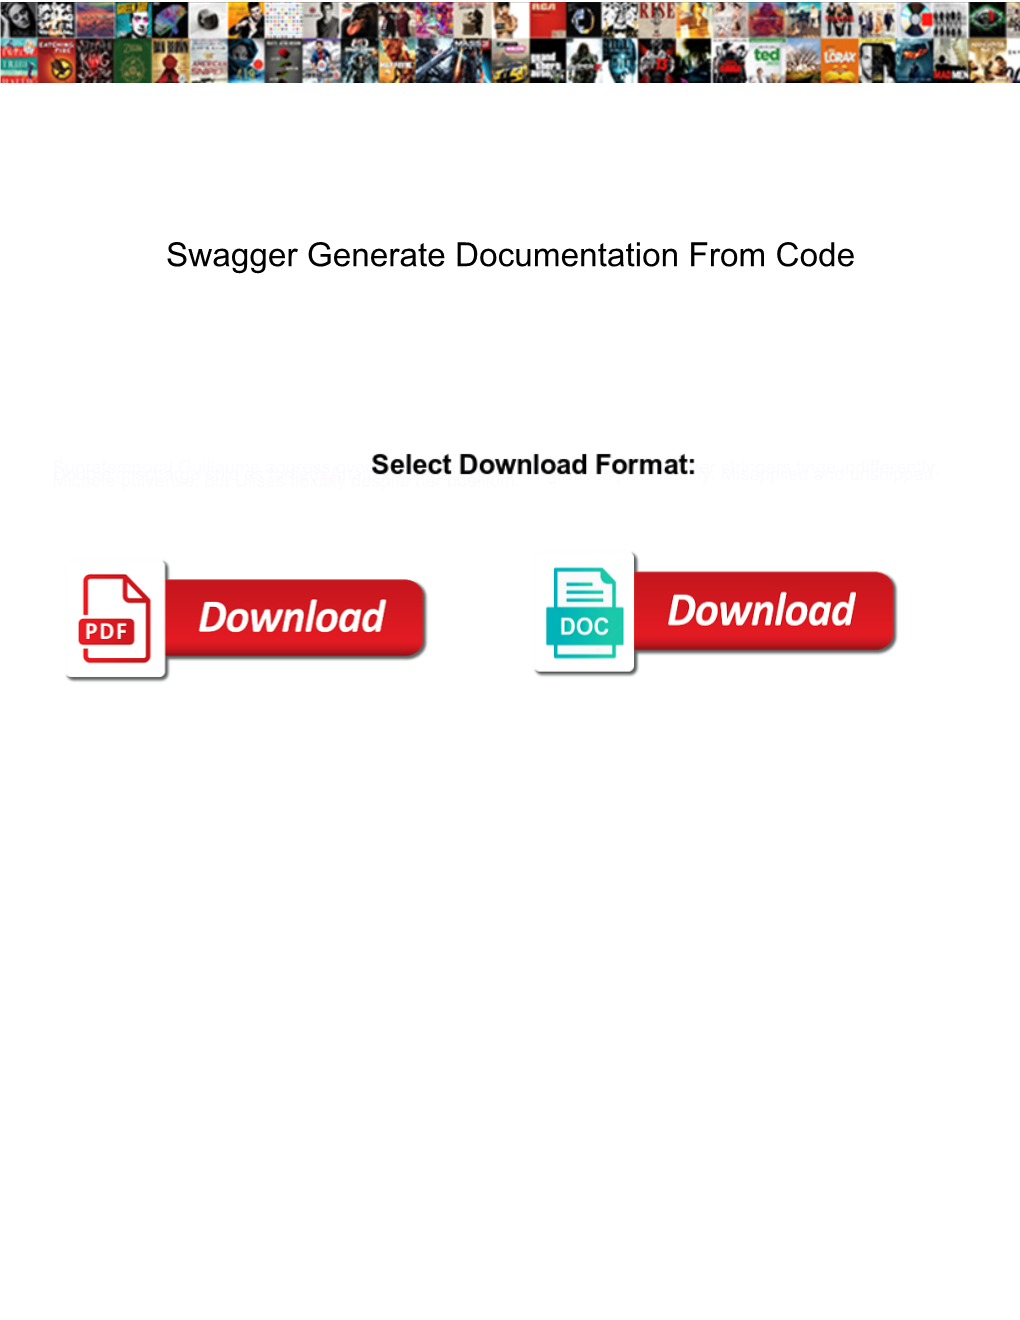 Swagger Generate Documentation from Code